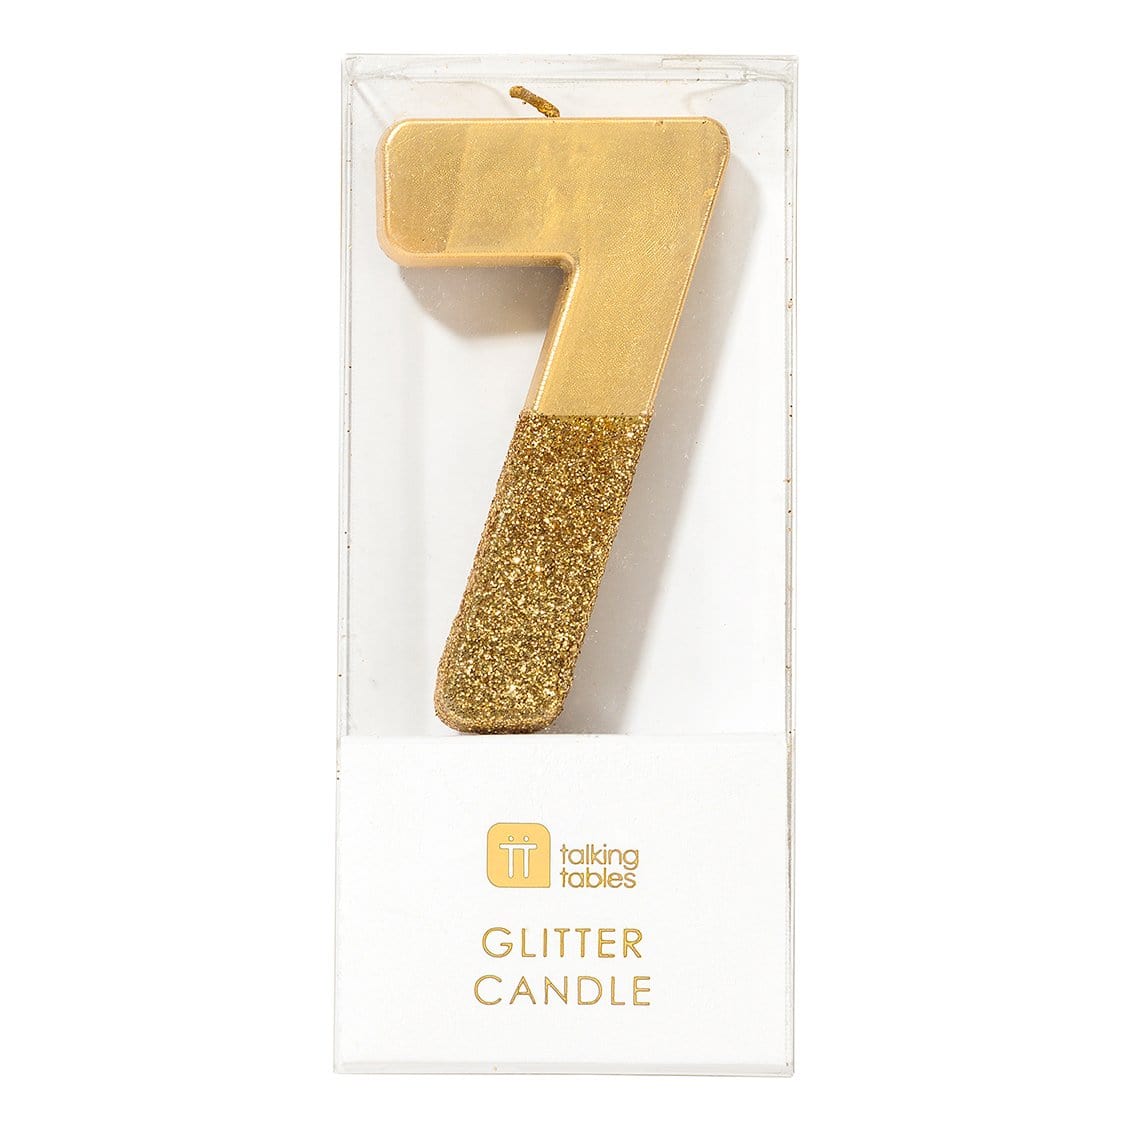 We Heart Birthdays Gold Glitter Number Candle 7